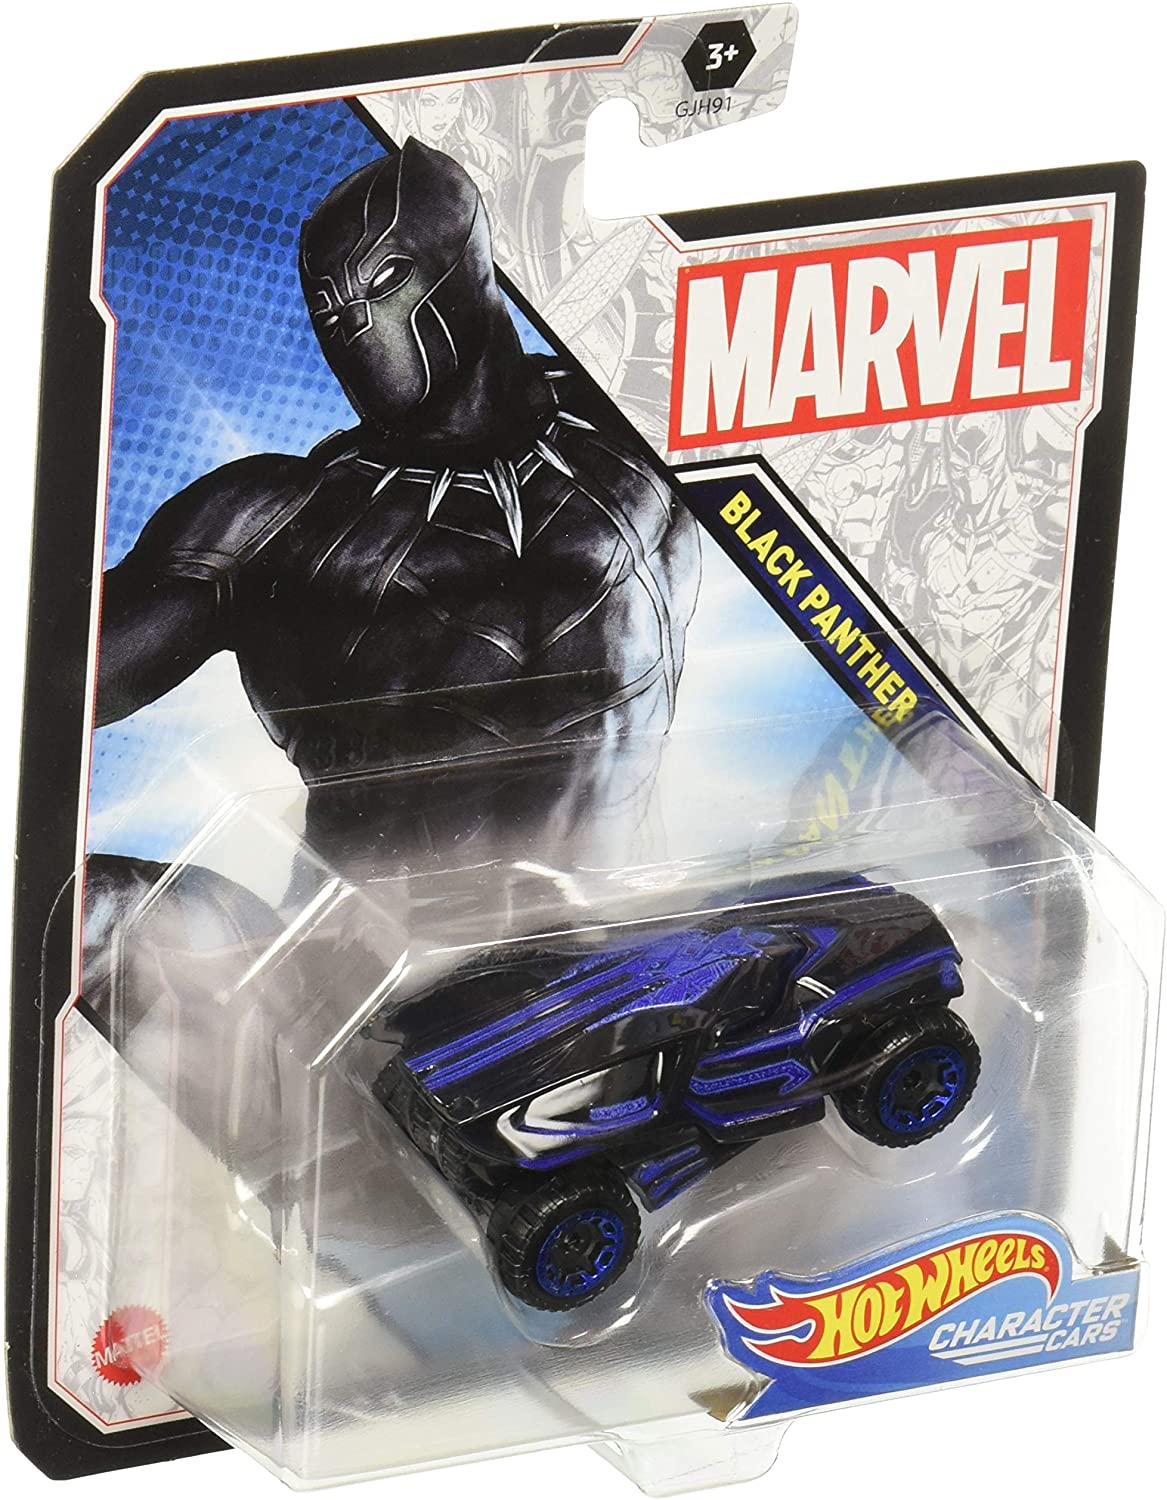 Hot Wheels Marvel Avengers - Black Panther Character Car 1:64 Diecast - Toptoys2u